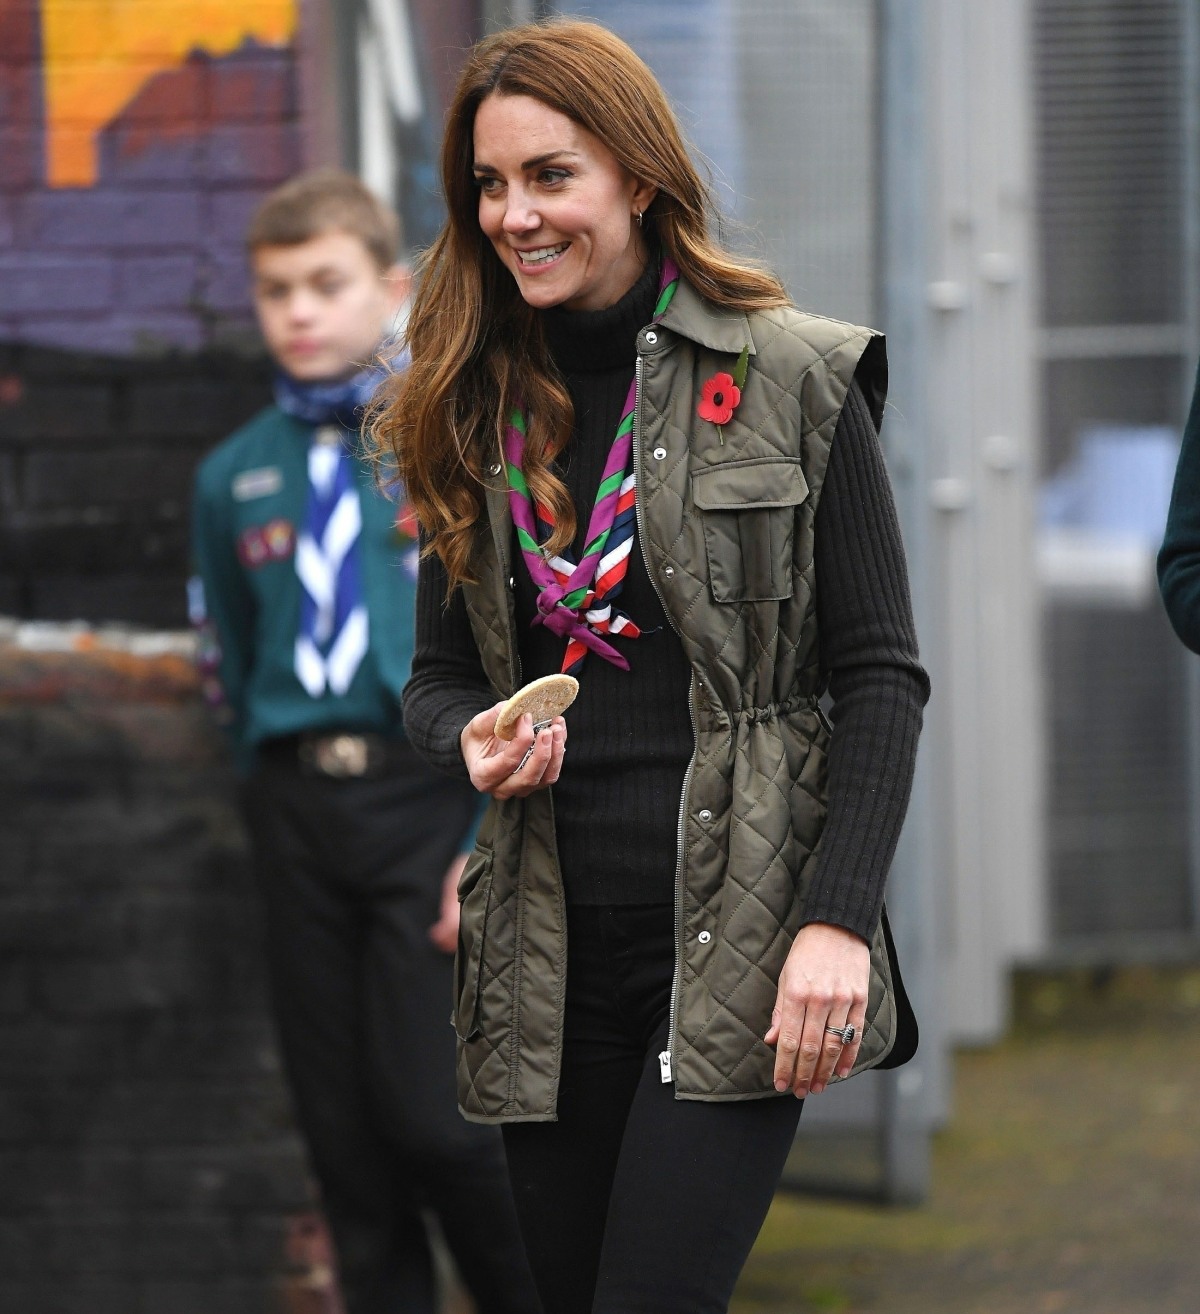 The Duke and Duchess of Cambridge will meet with Scouts from across Dennistoun and learn more about the Scouts’ #PromiseToThePlanet campaign